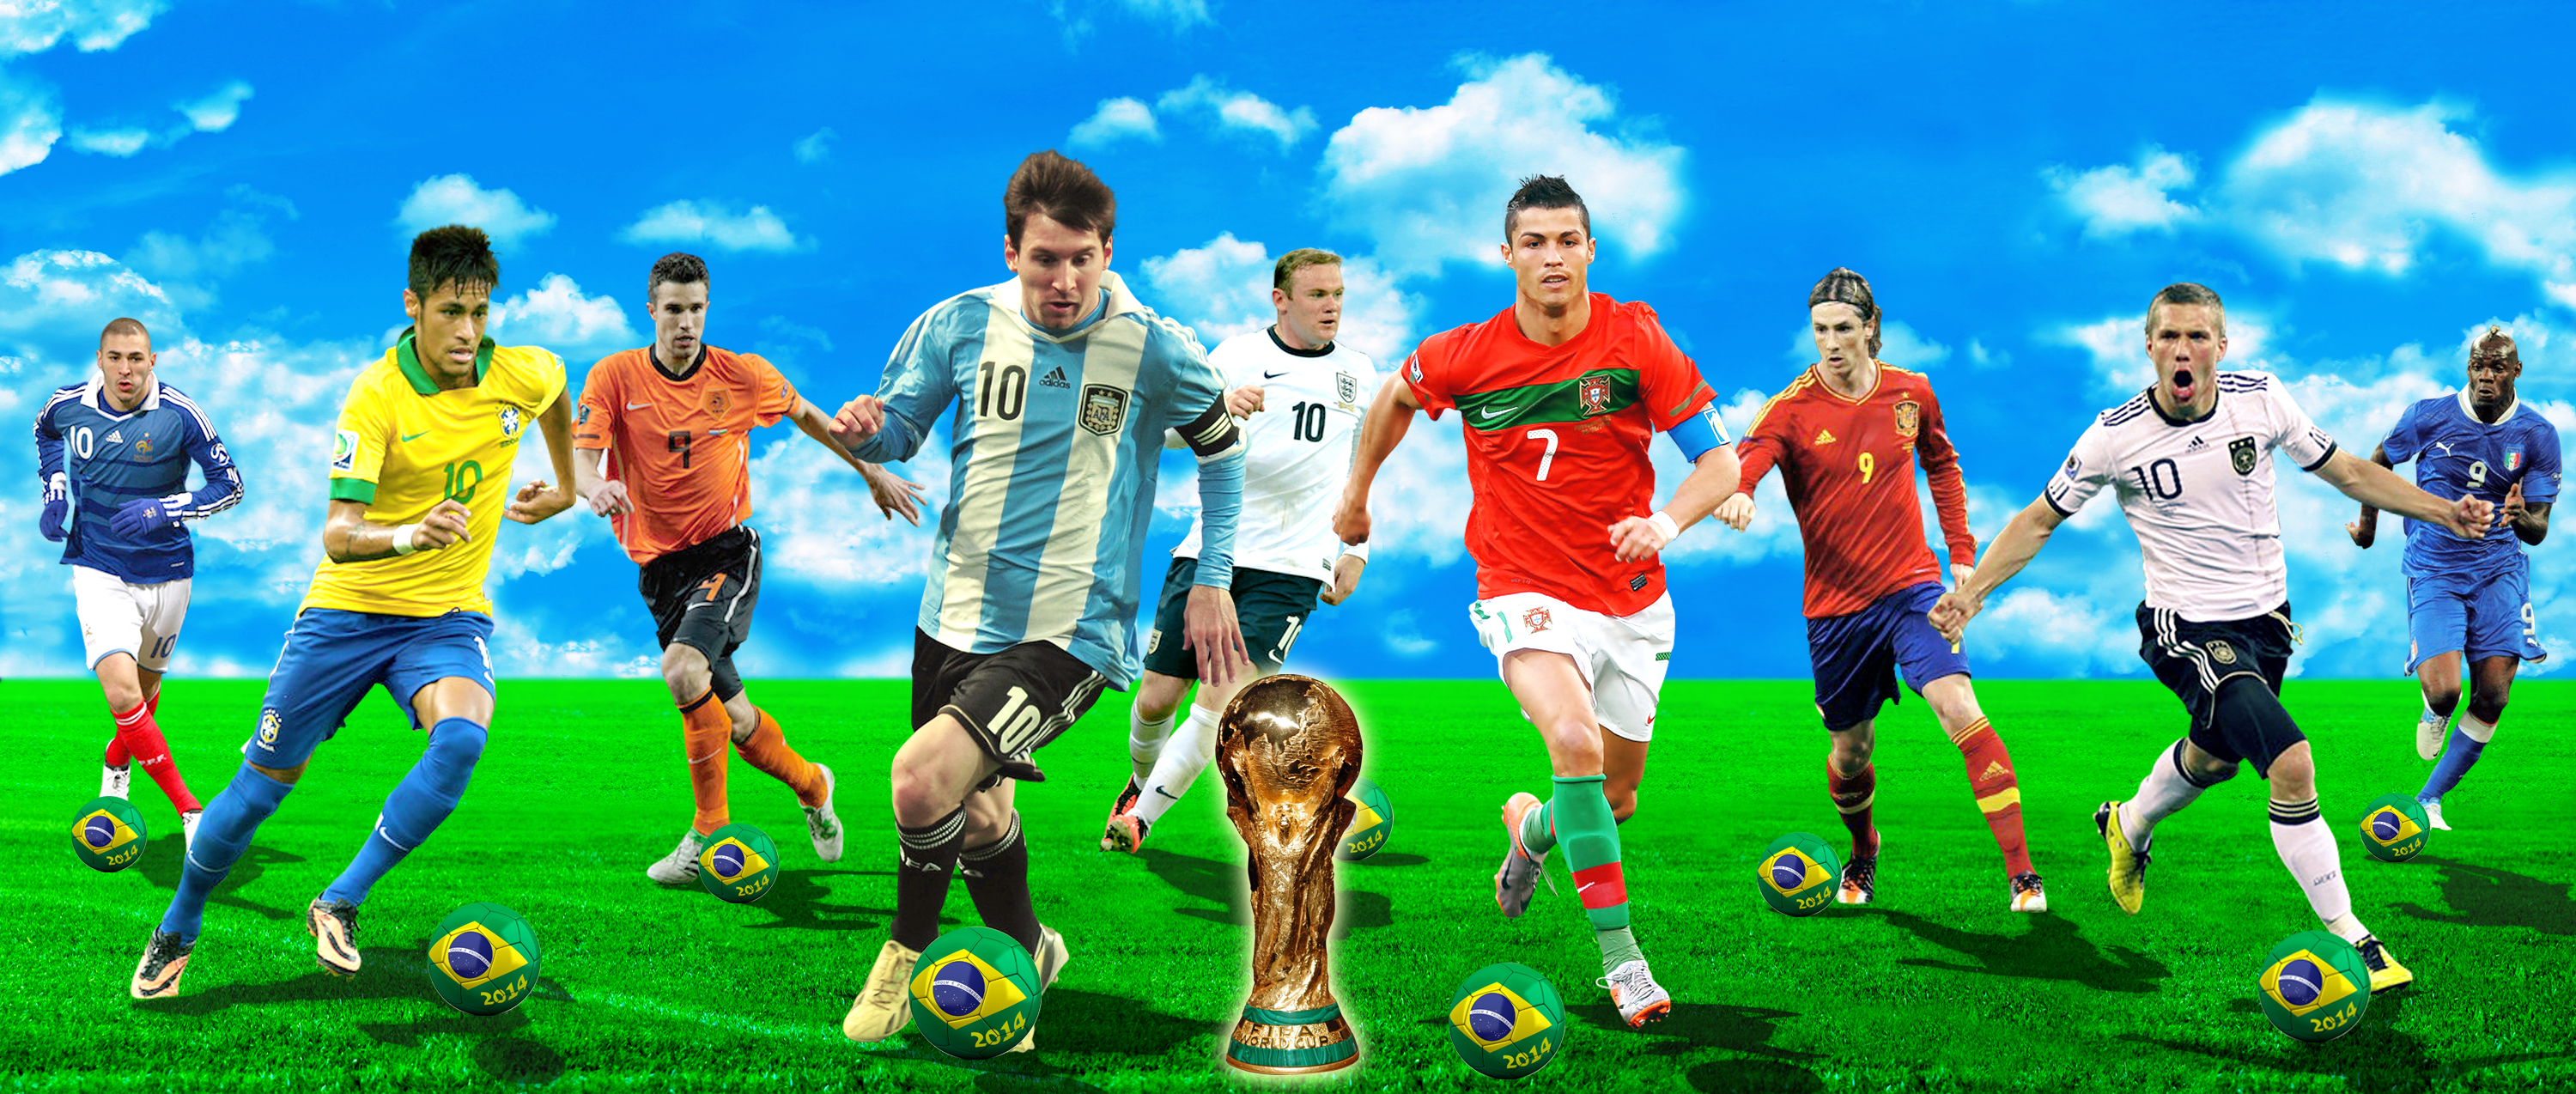 Best Soccer Player In Fifa Football World Cup With Resolutions